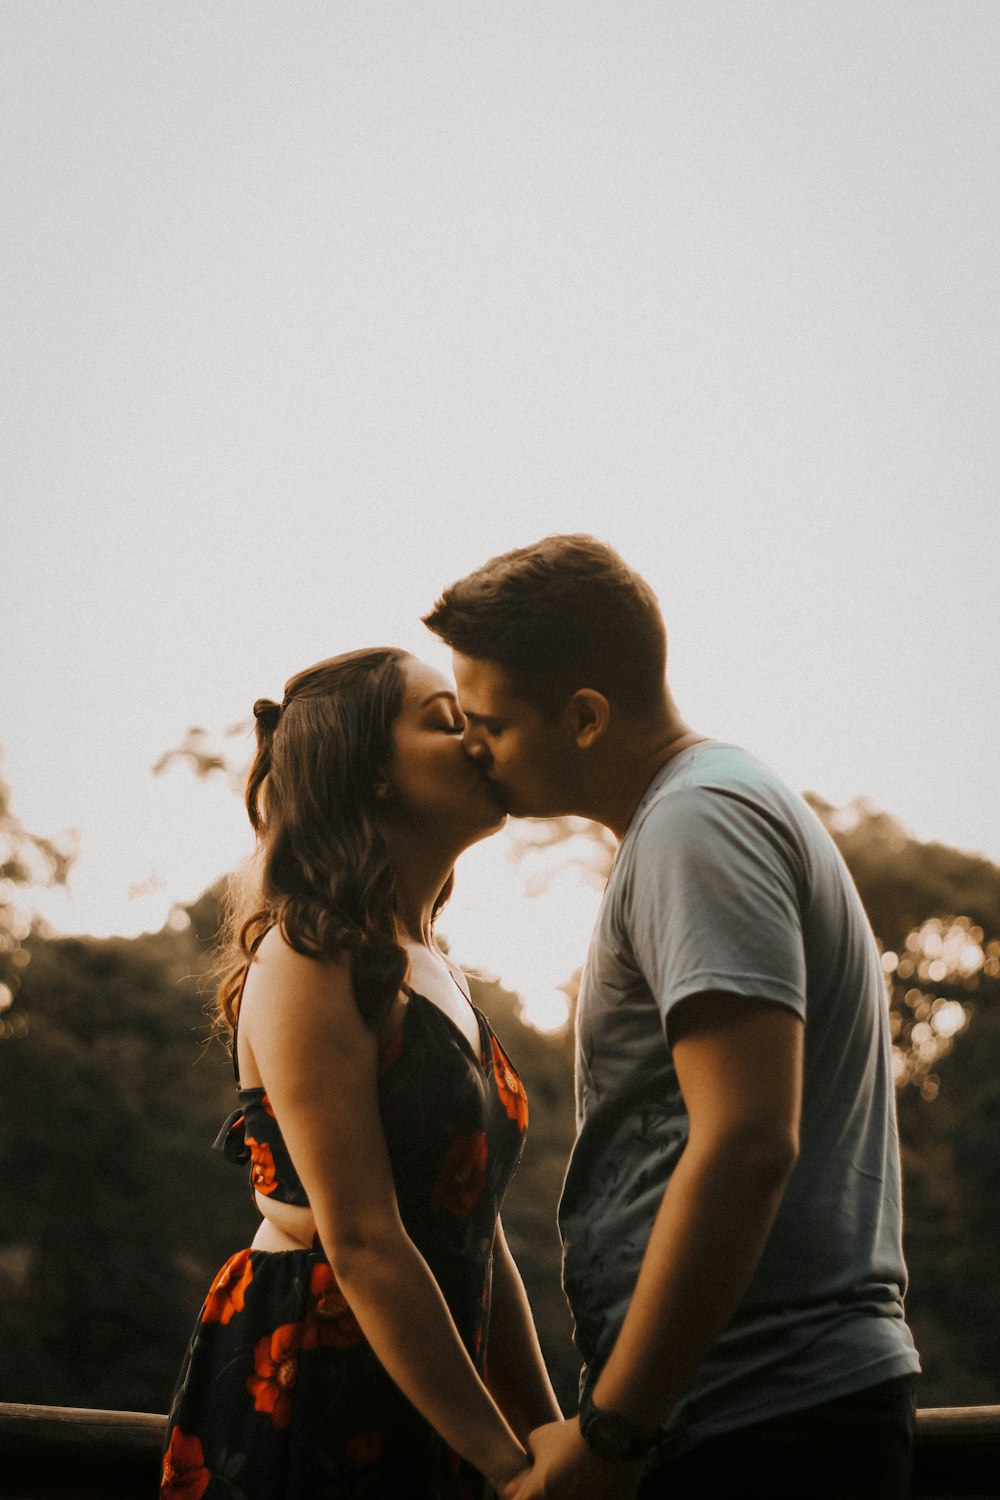 Kiss Romance Girl Video 3gp - 100+ Kissing Pictures | Download Free Images on Unsplash